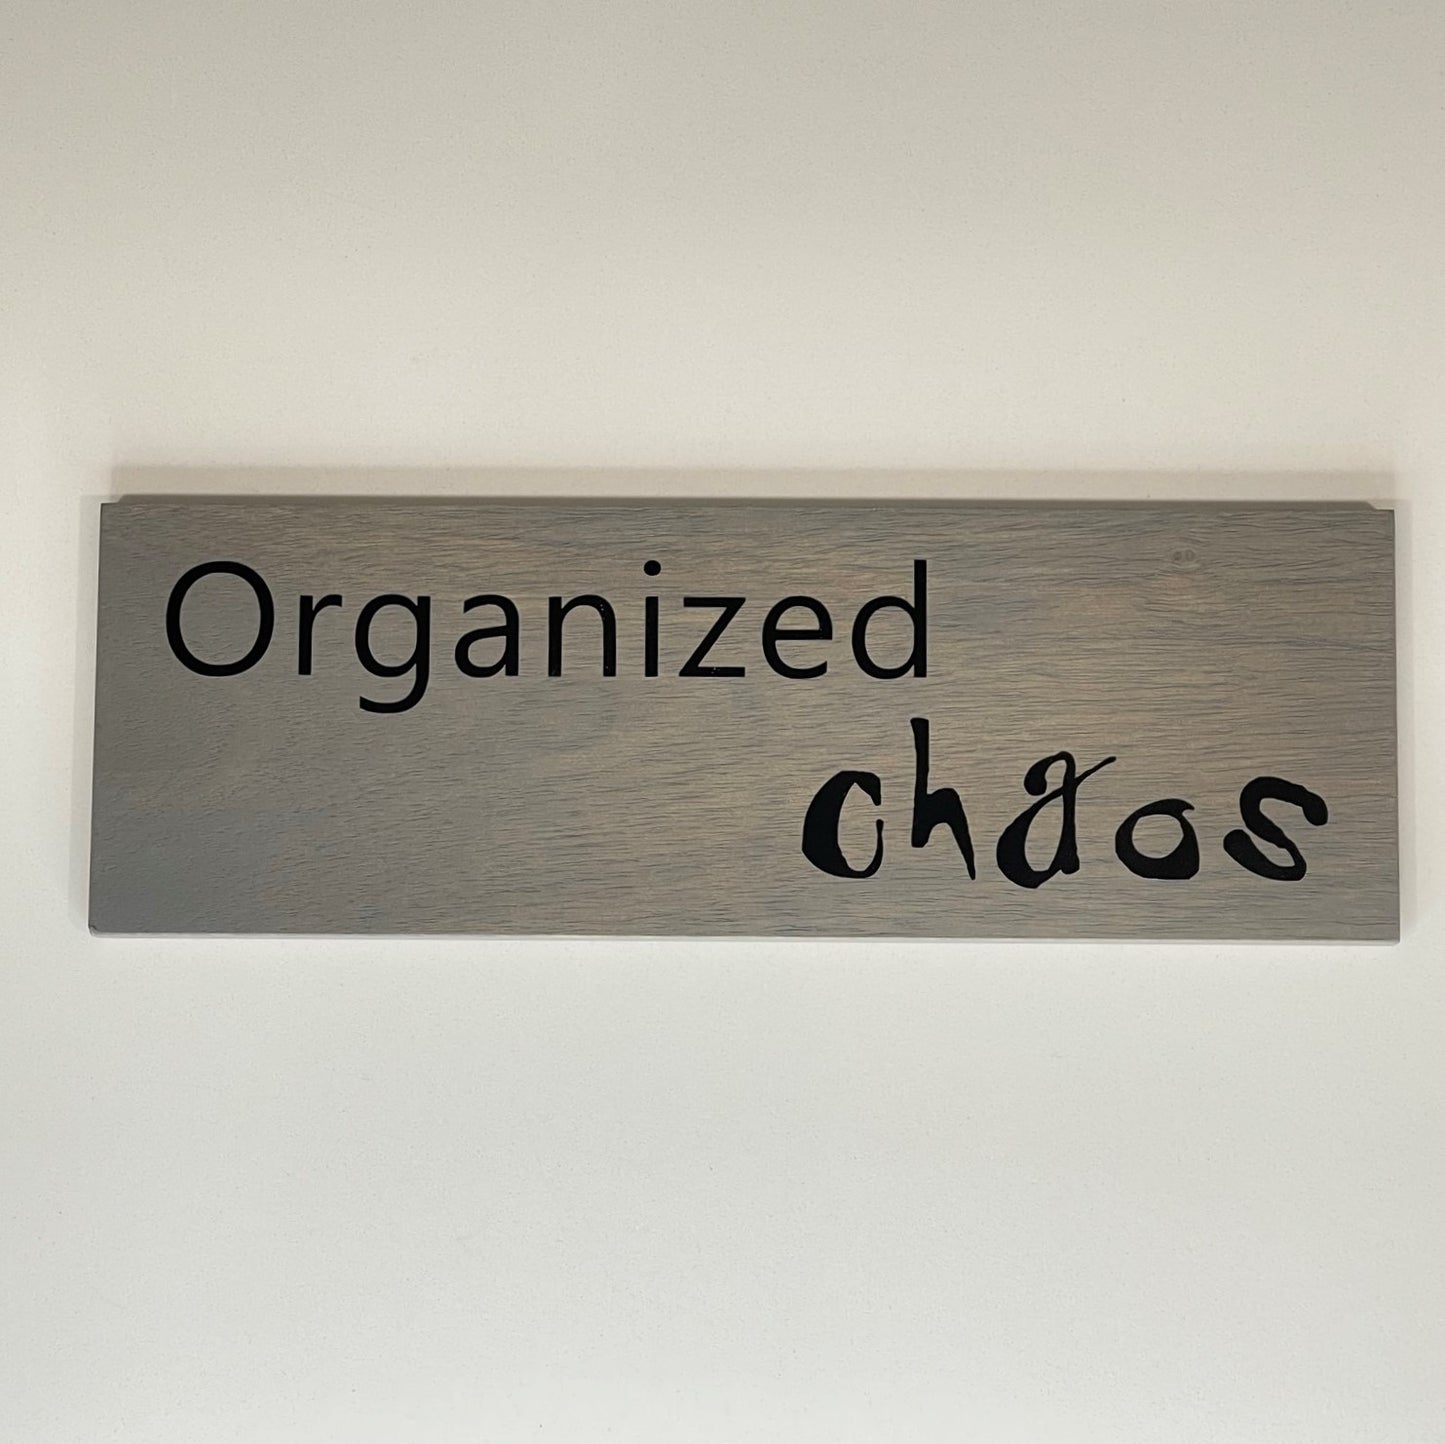 Organized Chaos - Funny Sign - Wall Decor - Office Wall Art - Wooden Sign